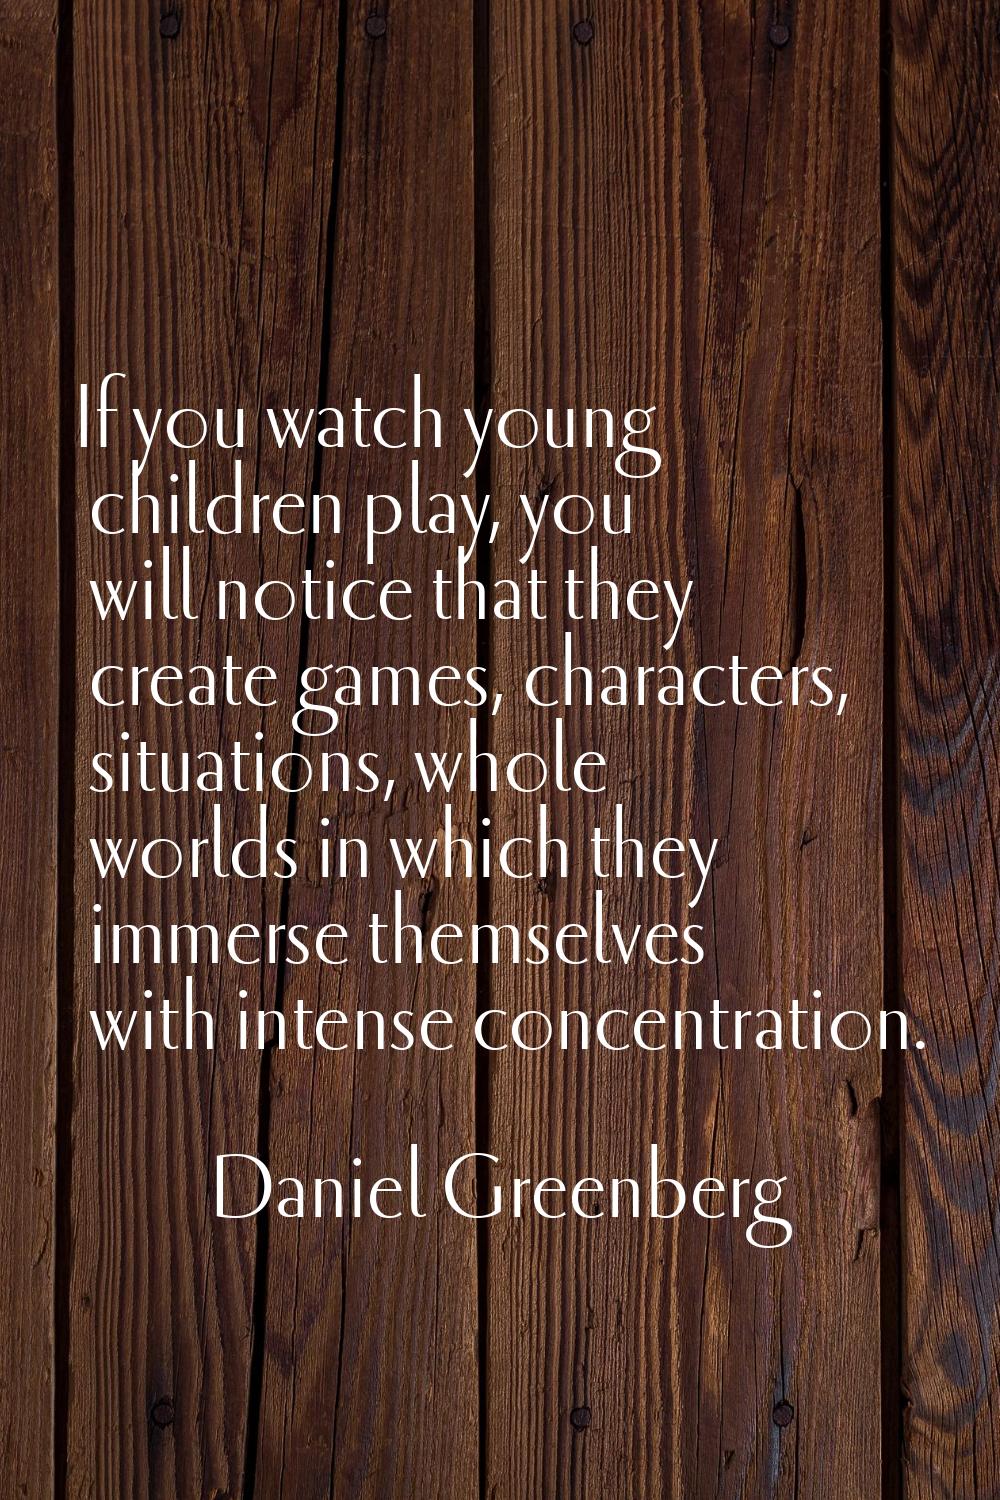 If you watch young children play, you will notice that they create games, characters, situations, w